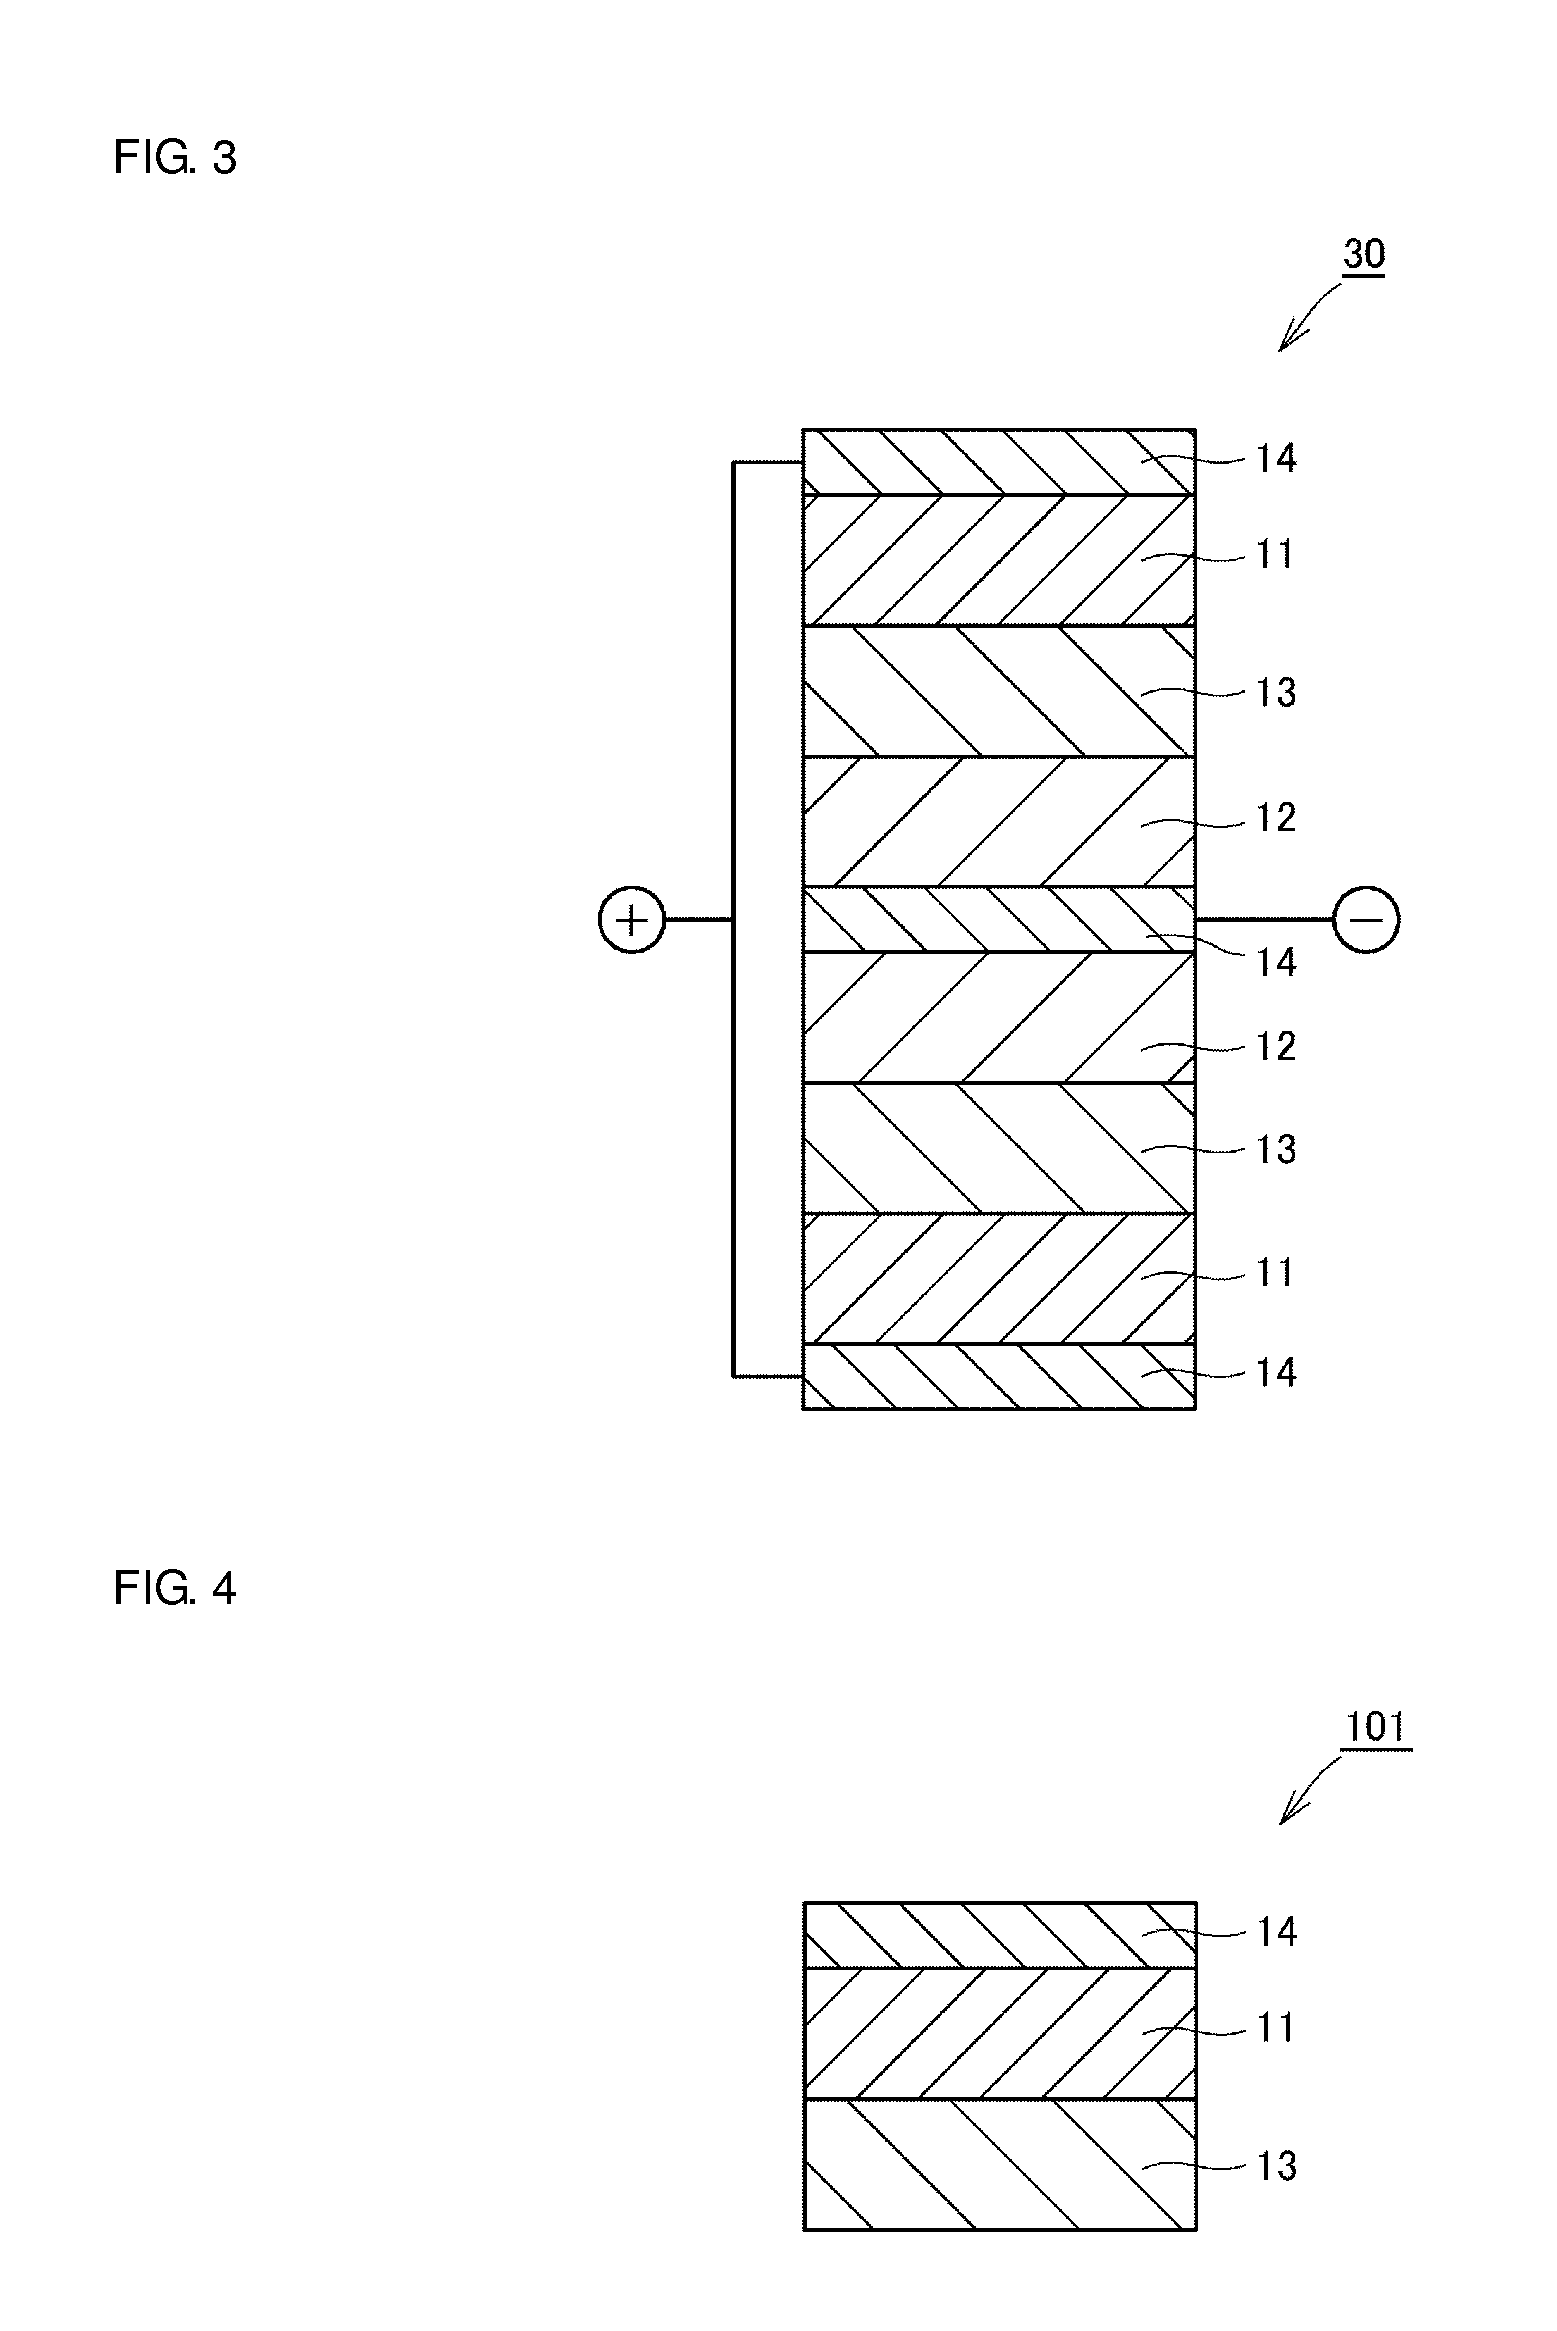 Total Solid Battery and Method of Producing the Same